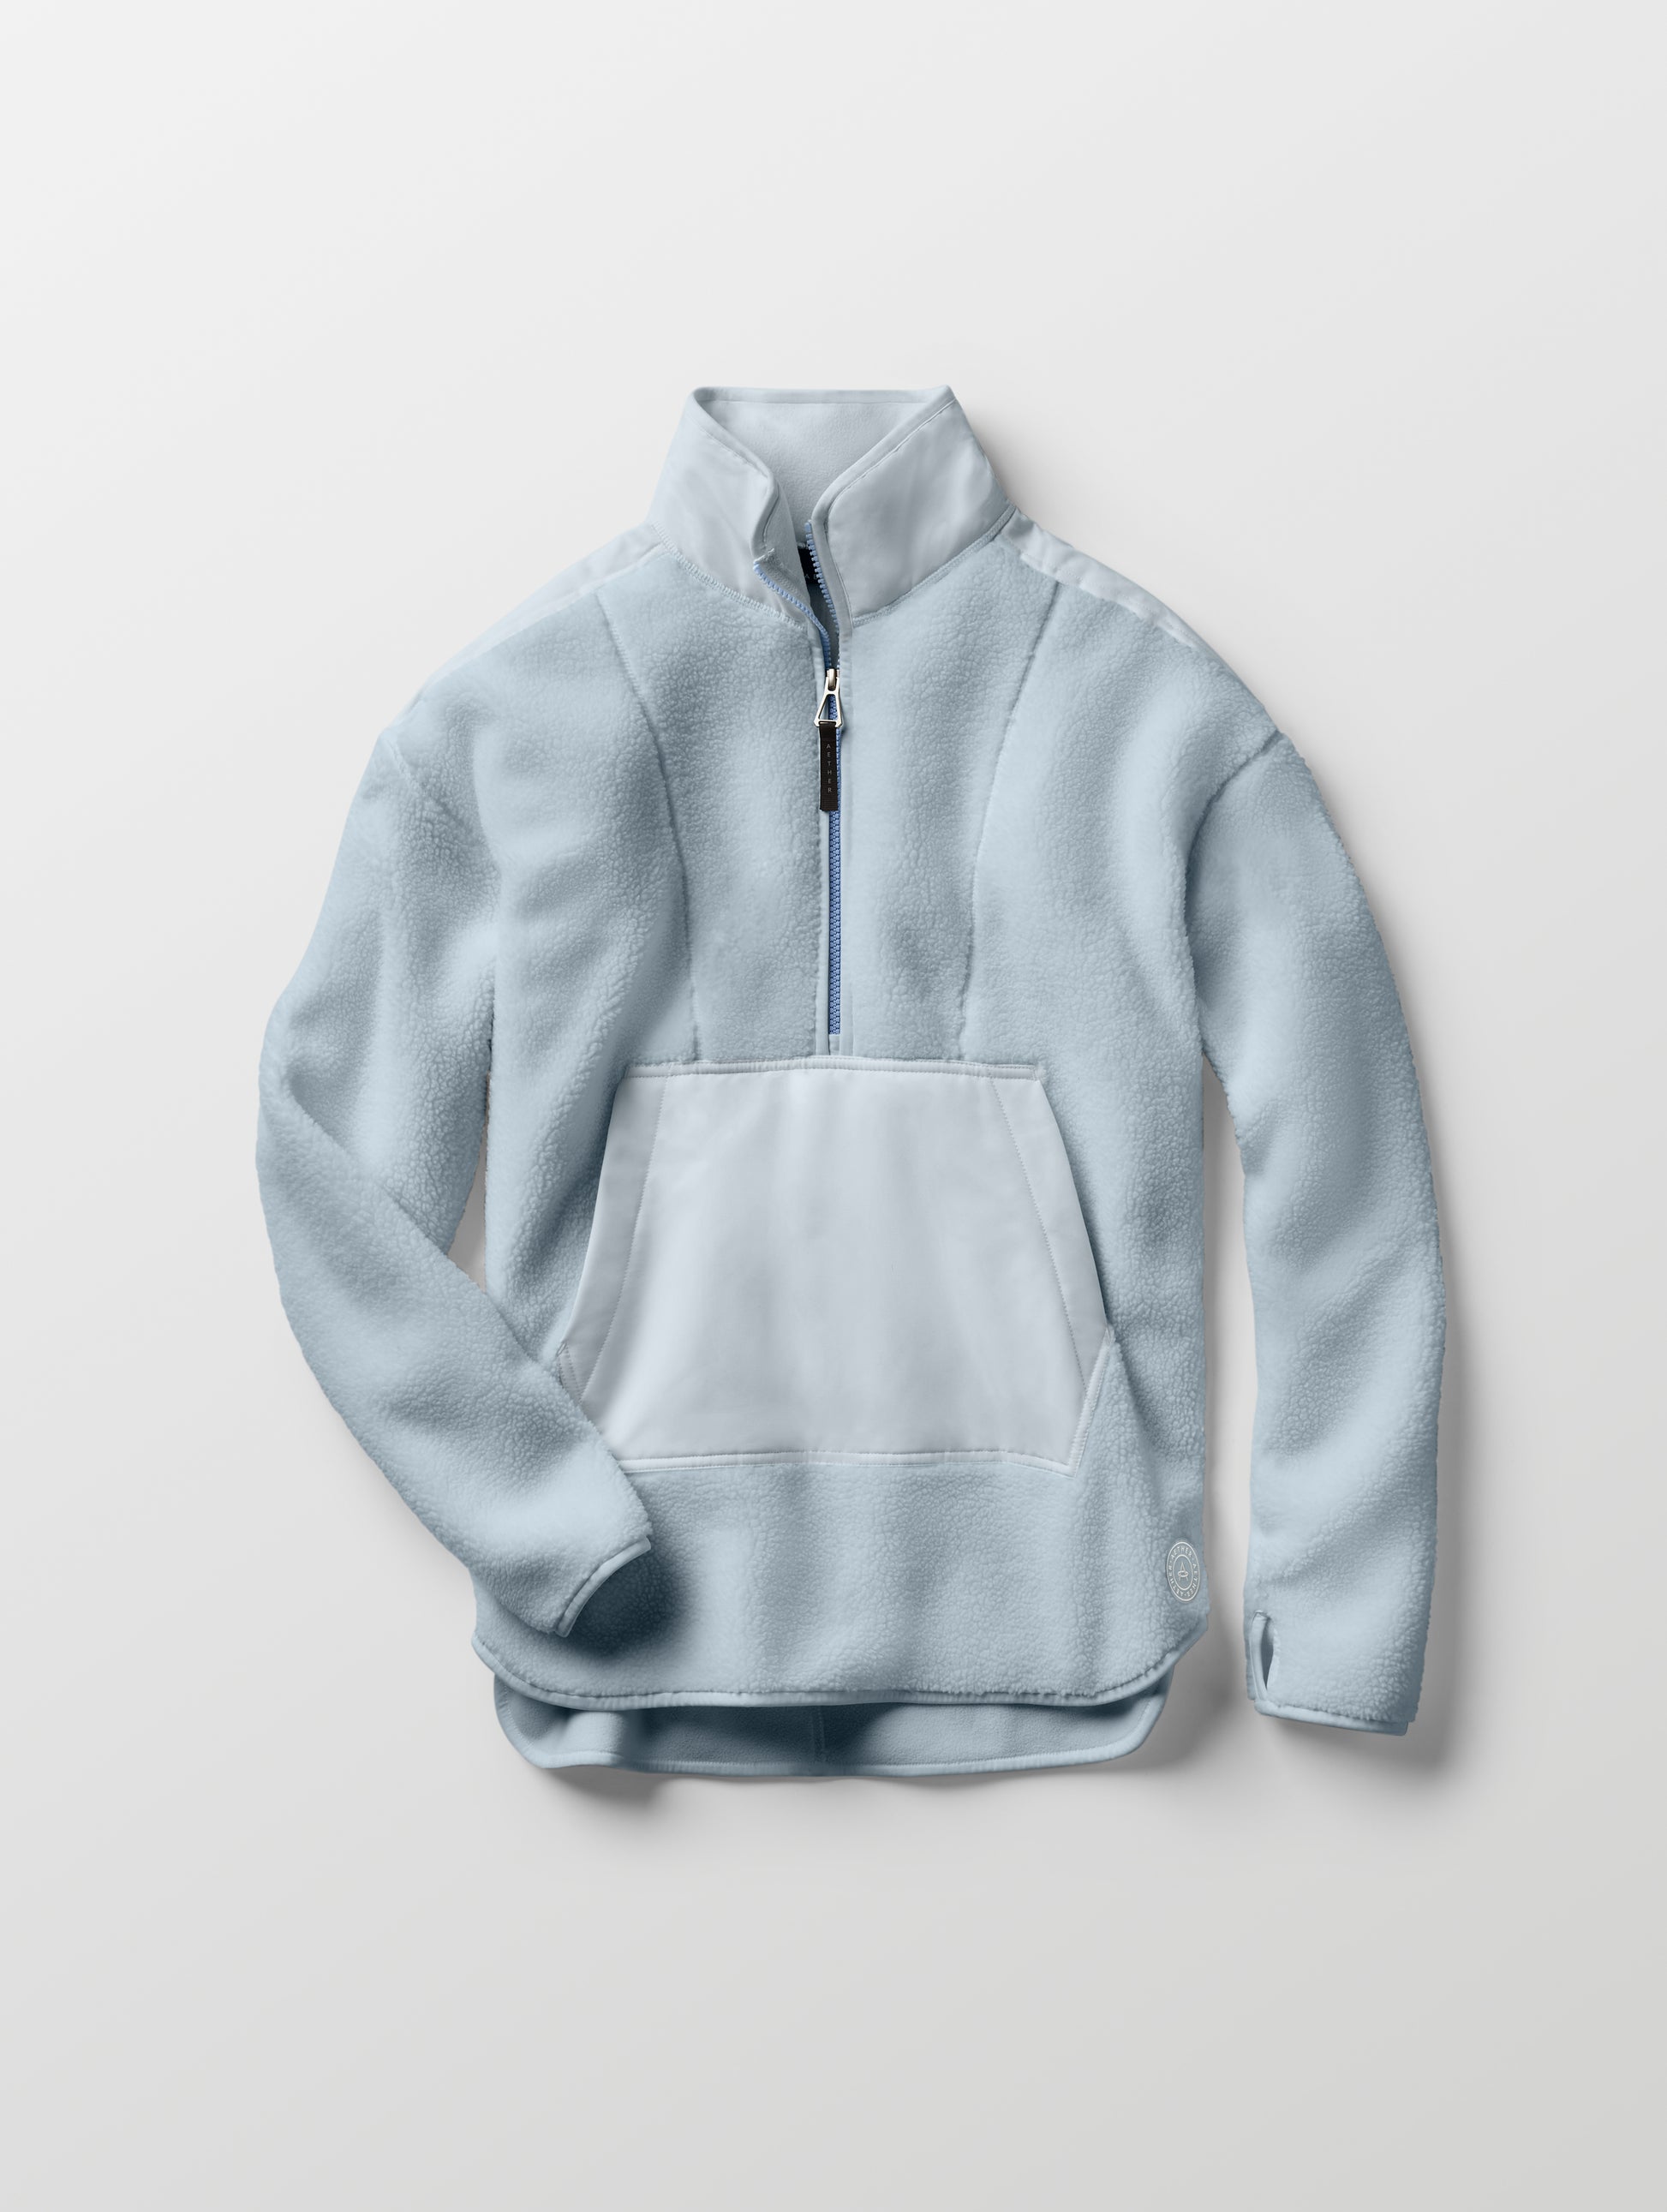 Blue fleece anorak from AETHER Apparel